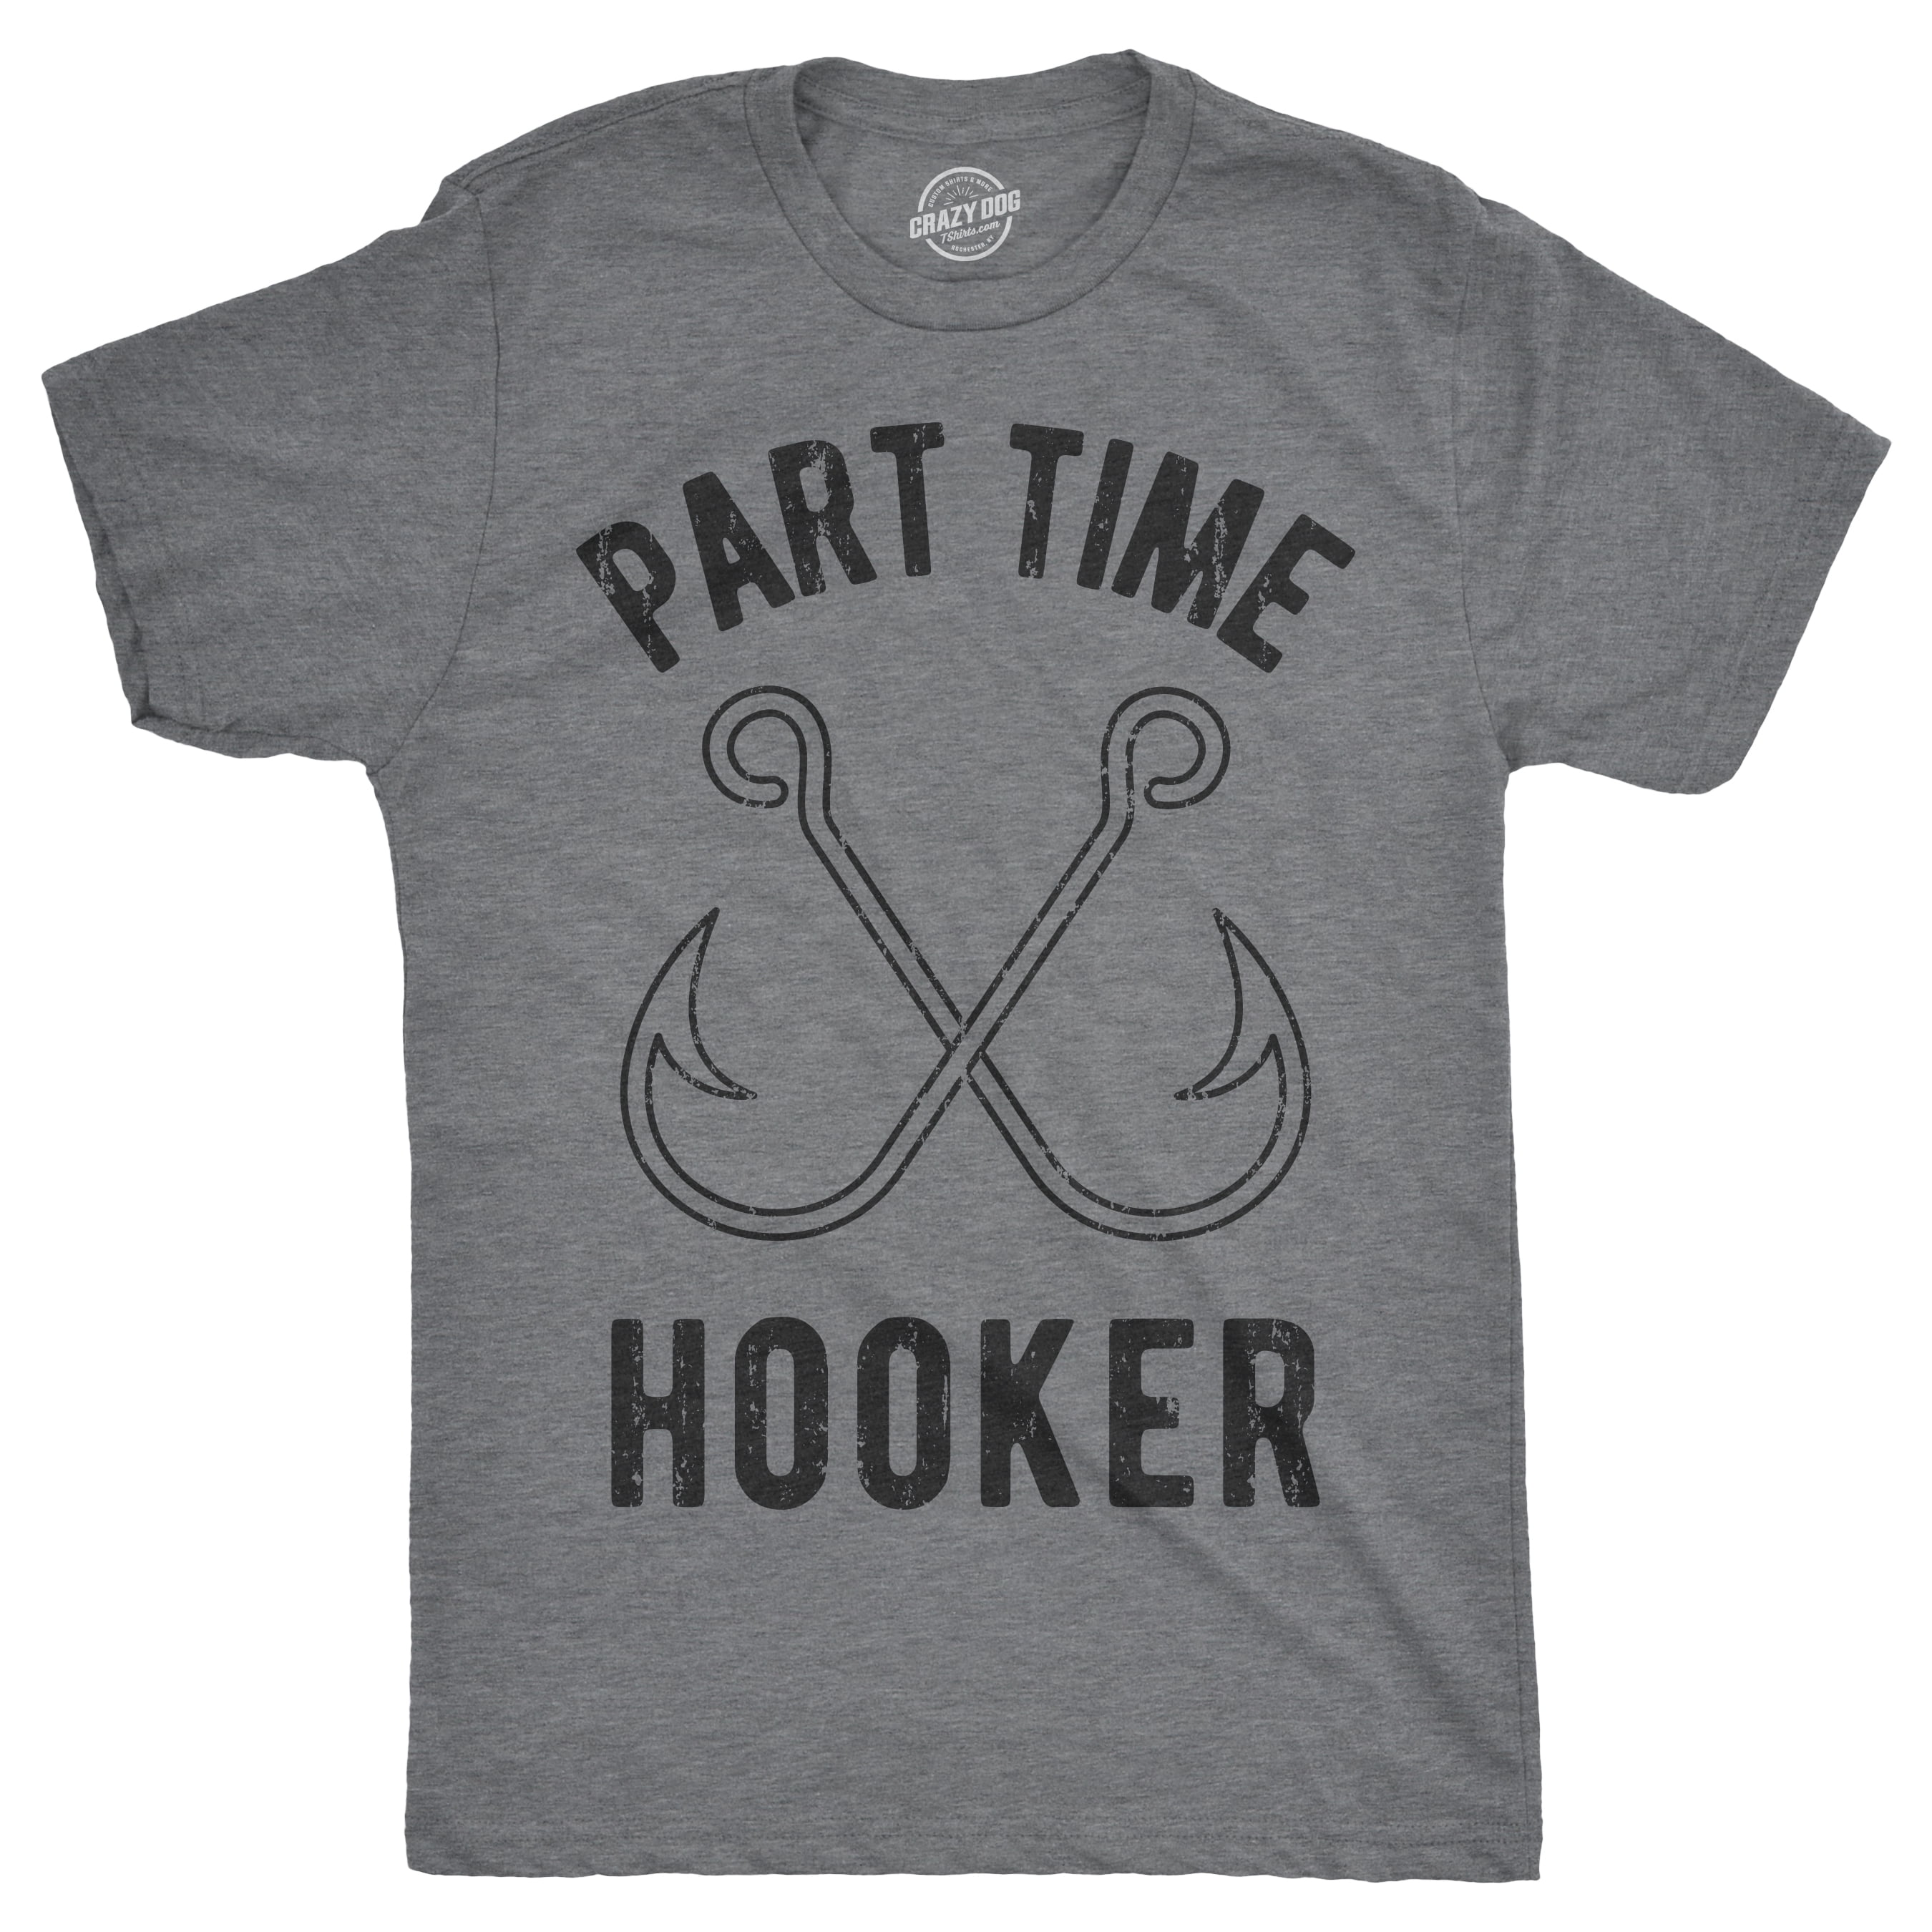 Mens Part Time Hooker T shirt Funny Fishing Hook Sarcastic Tee for Dad  Graphic Tees 